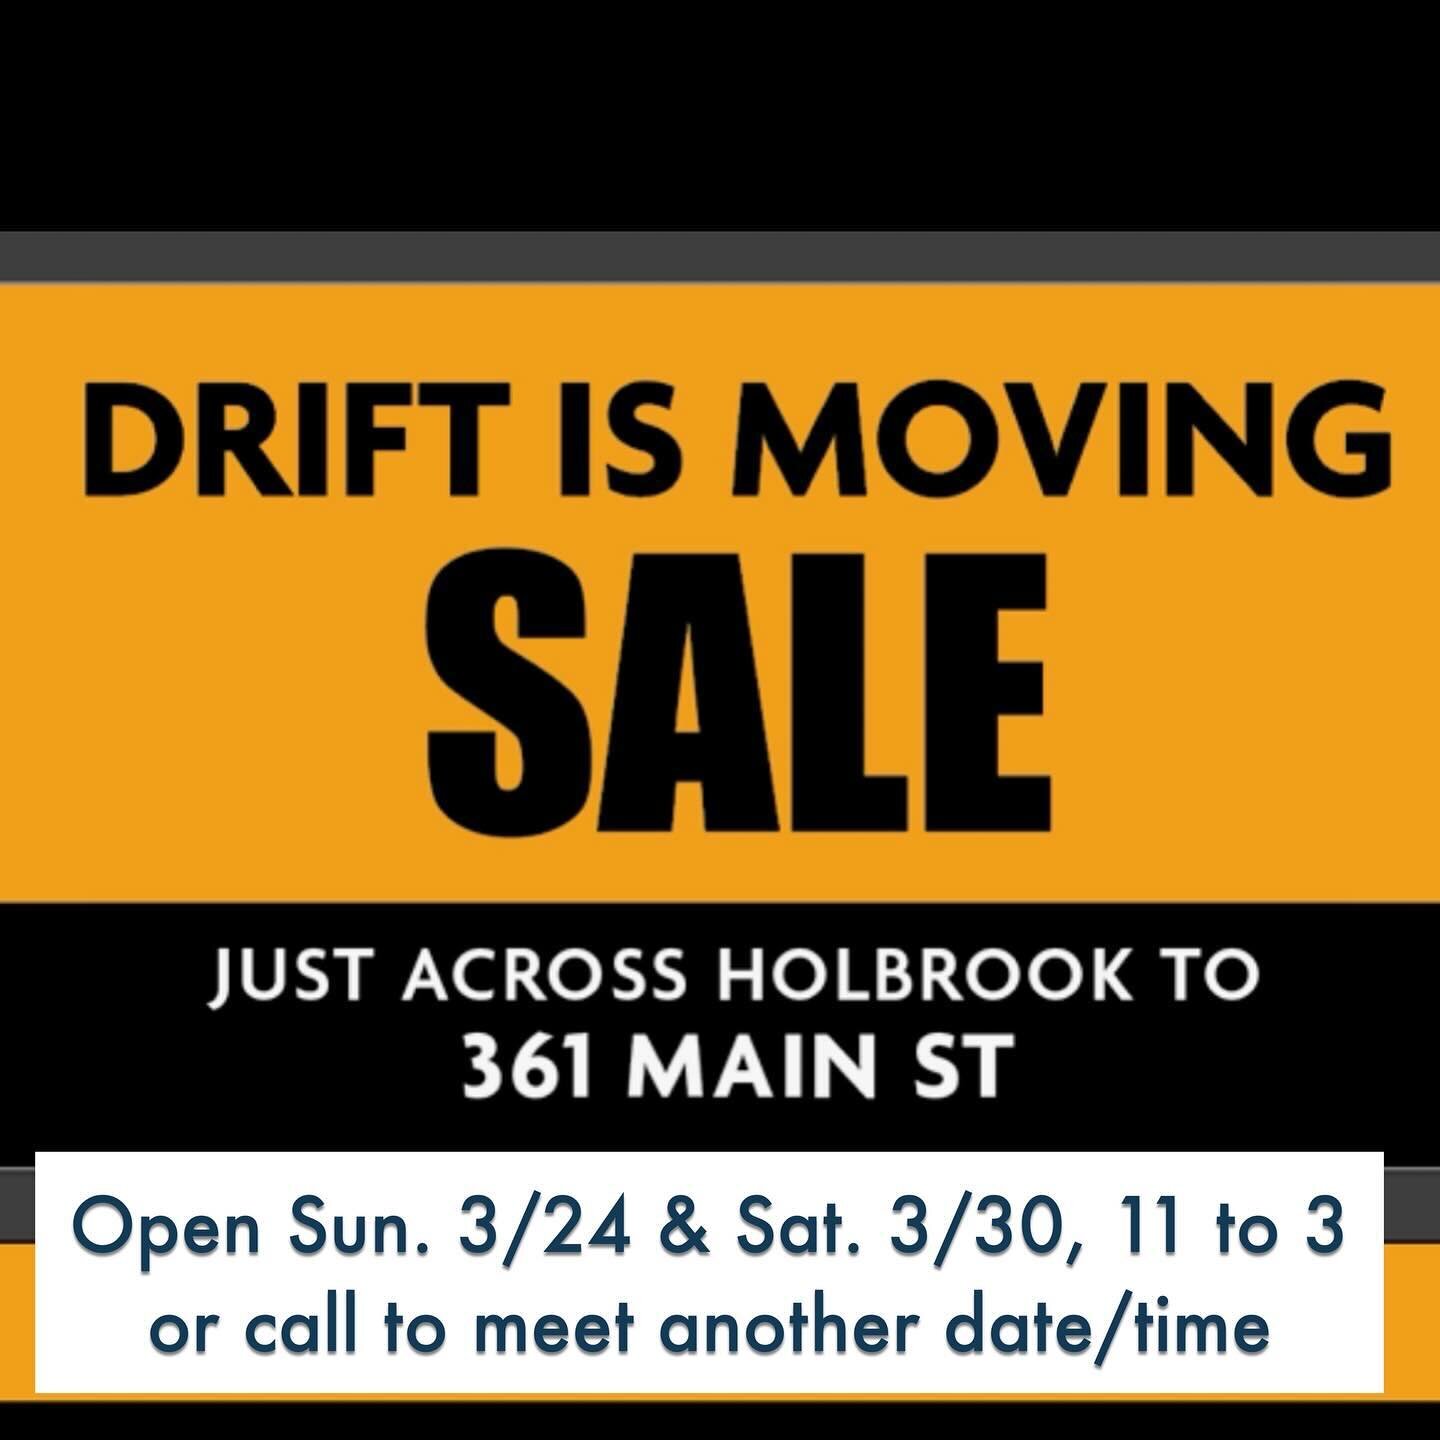 OPEN &mdash; lots of great goods still available &mdash;
Sunday, March 24, 11 to 3
Saturday, March 30, 11 to 3
or call to meet @DRIFTwellfleet another date/time
.
.
.
.
.
.
.
.
.
.
.
#wellfleet #eastham #orleans #brewster #provincetown #dennis #chath